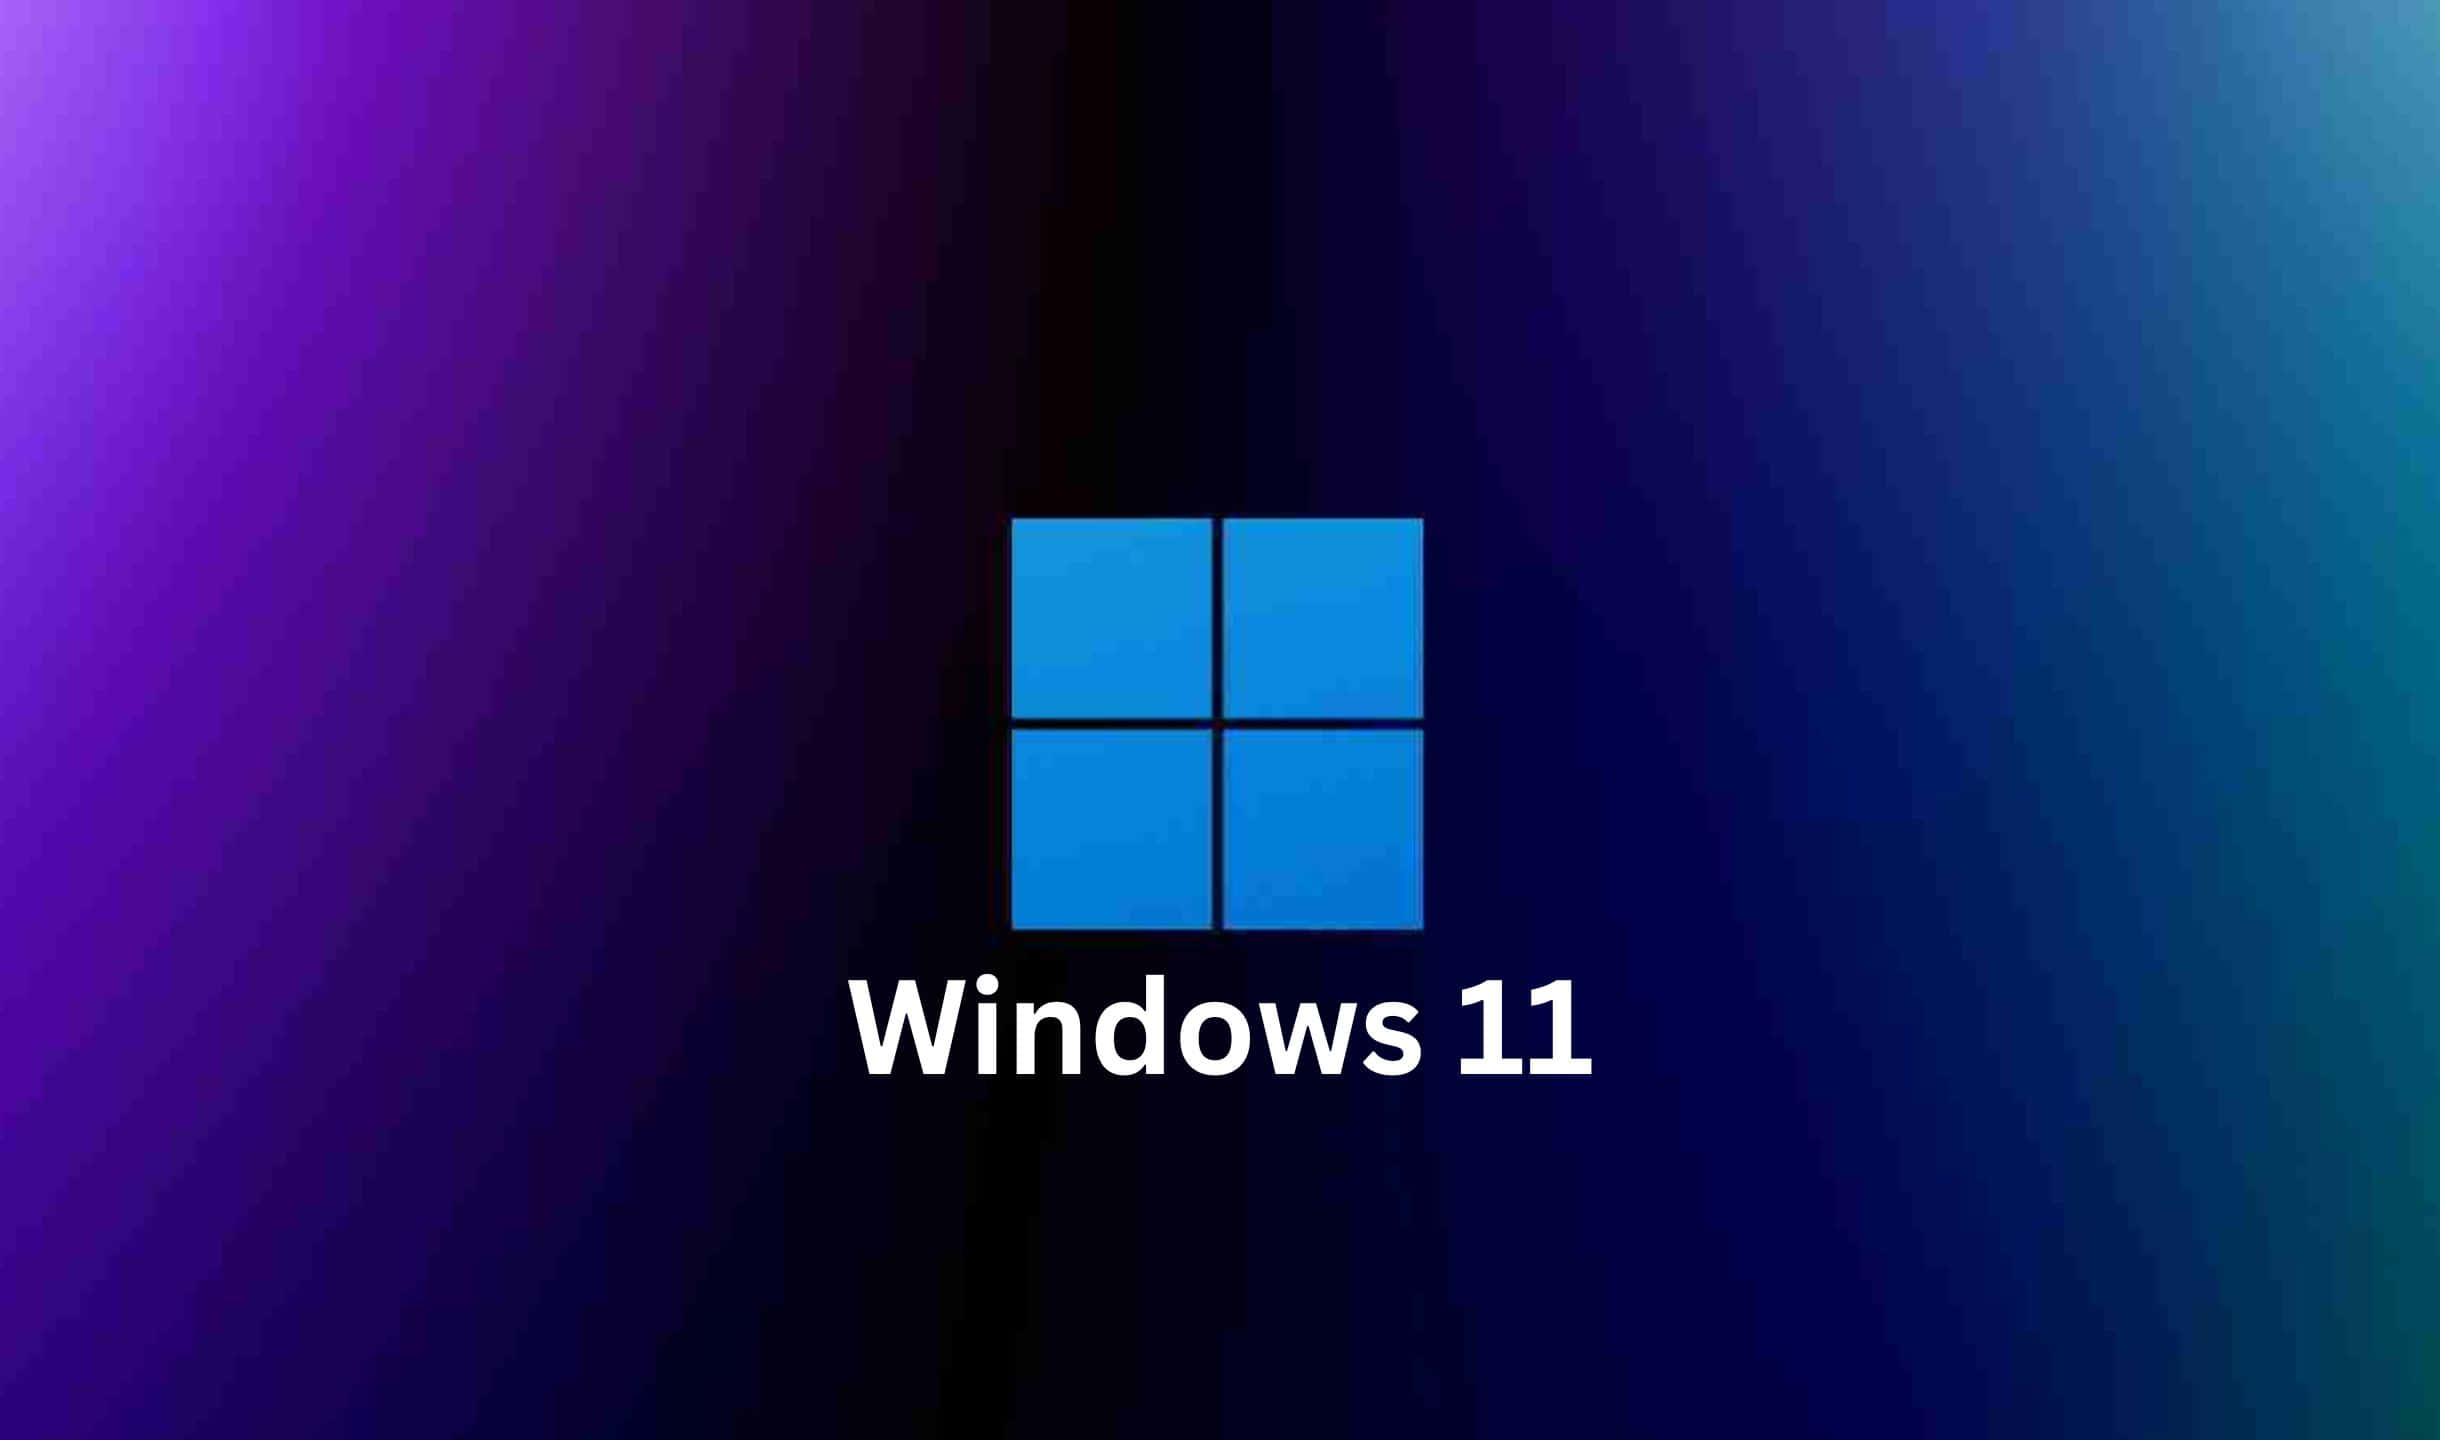 The All-New Windows 11 Operating System